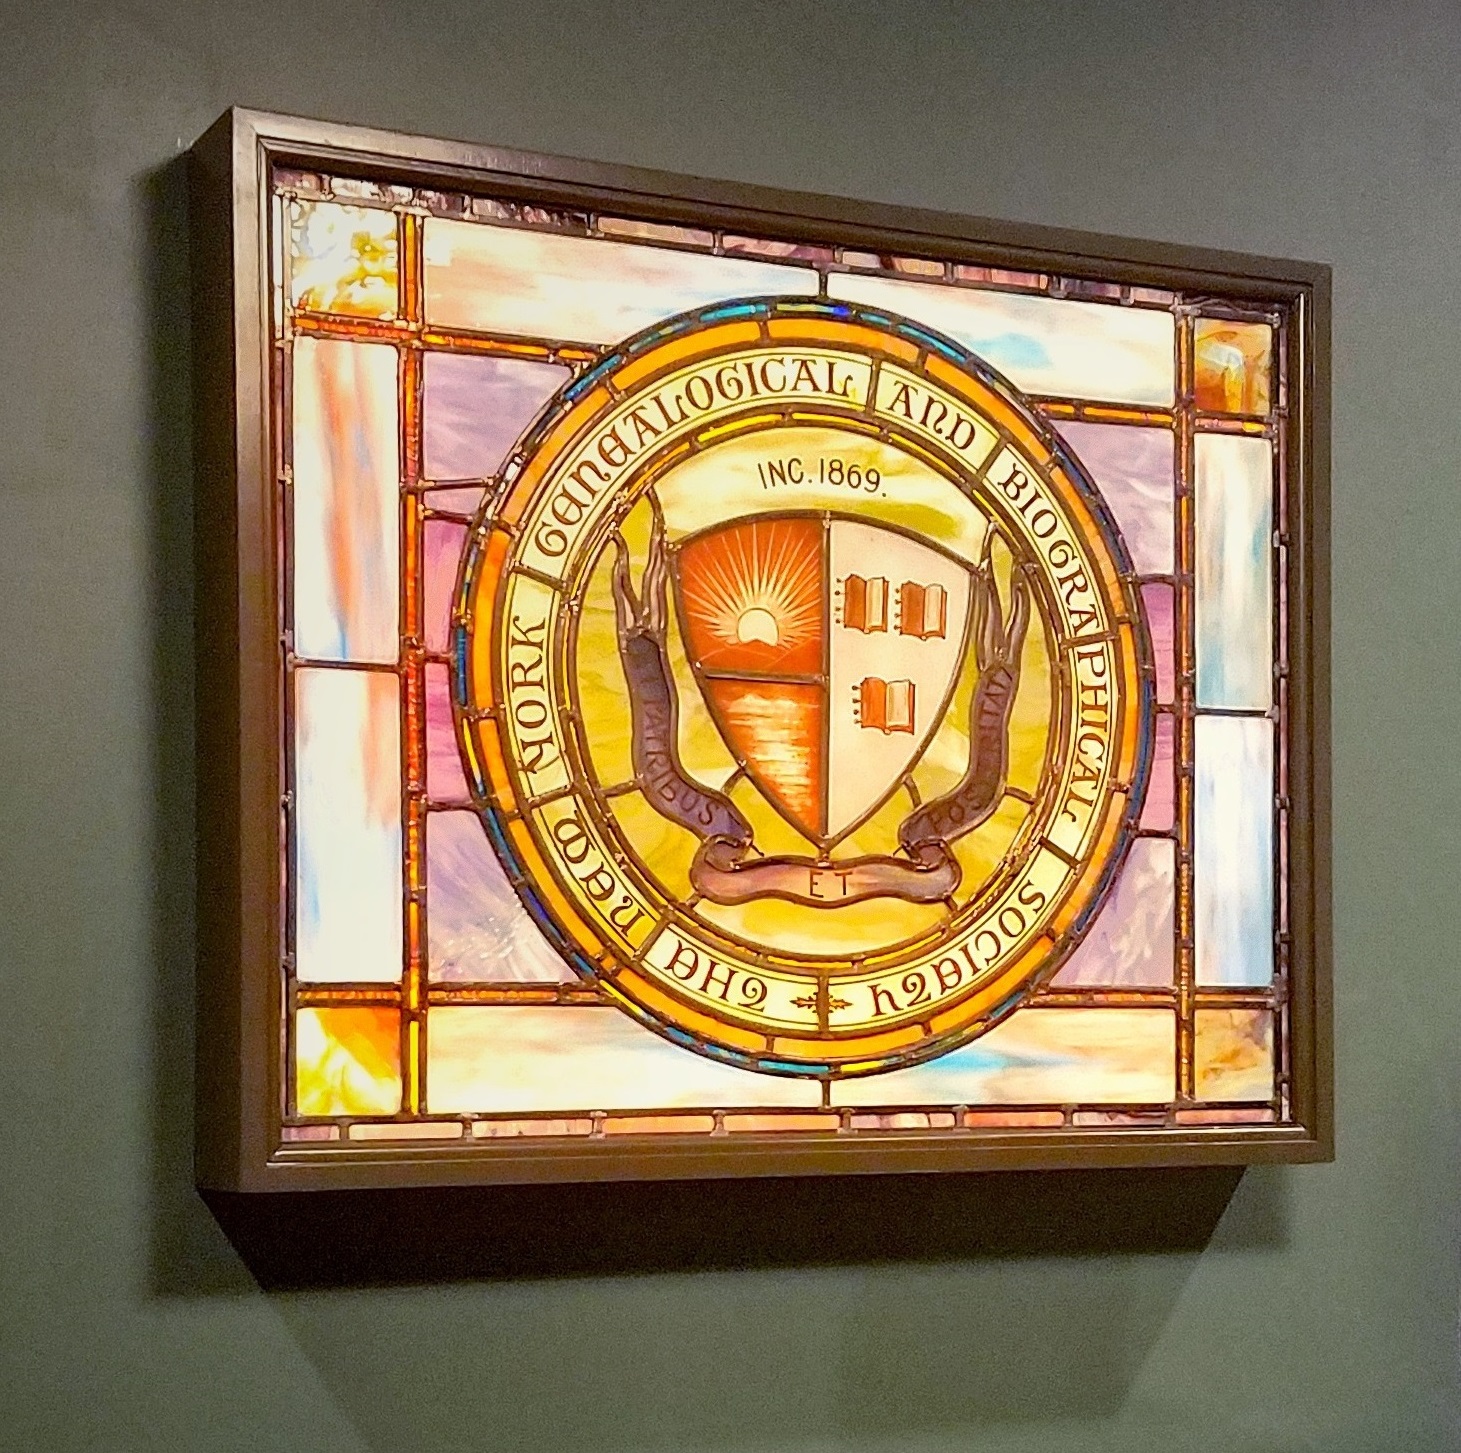 A stained glass window displaying the seal of the New York Genealogical and Biographical Society